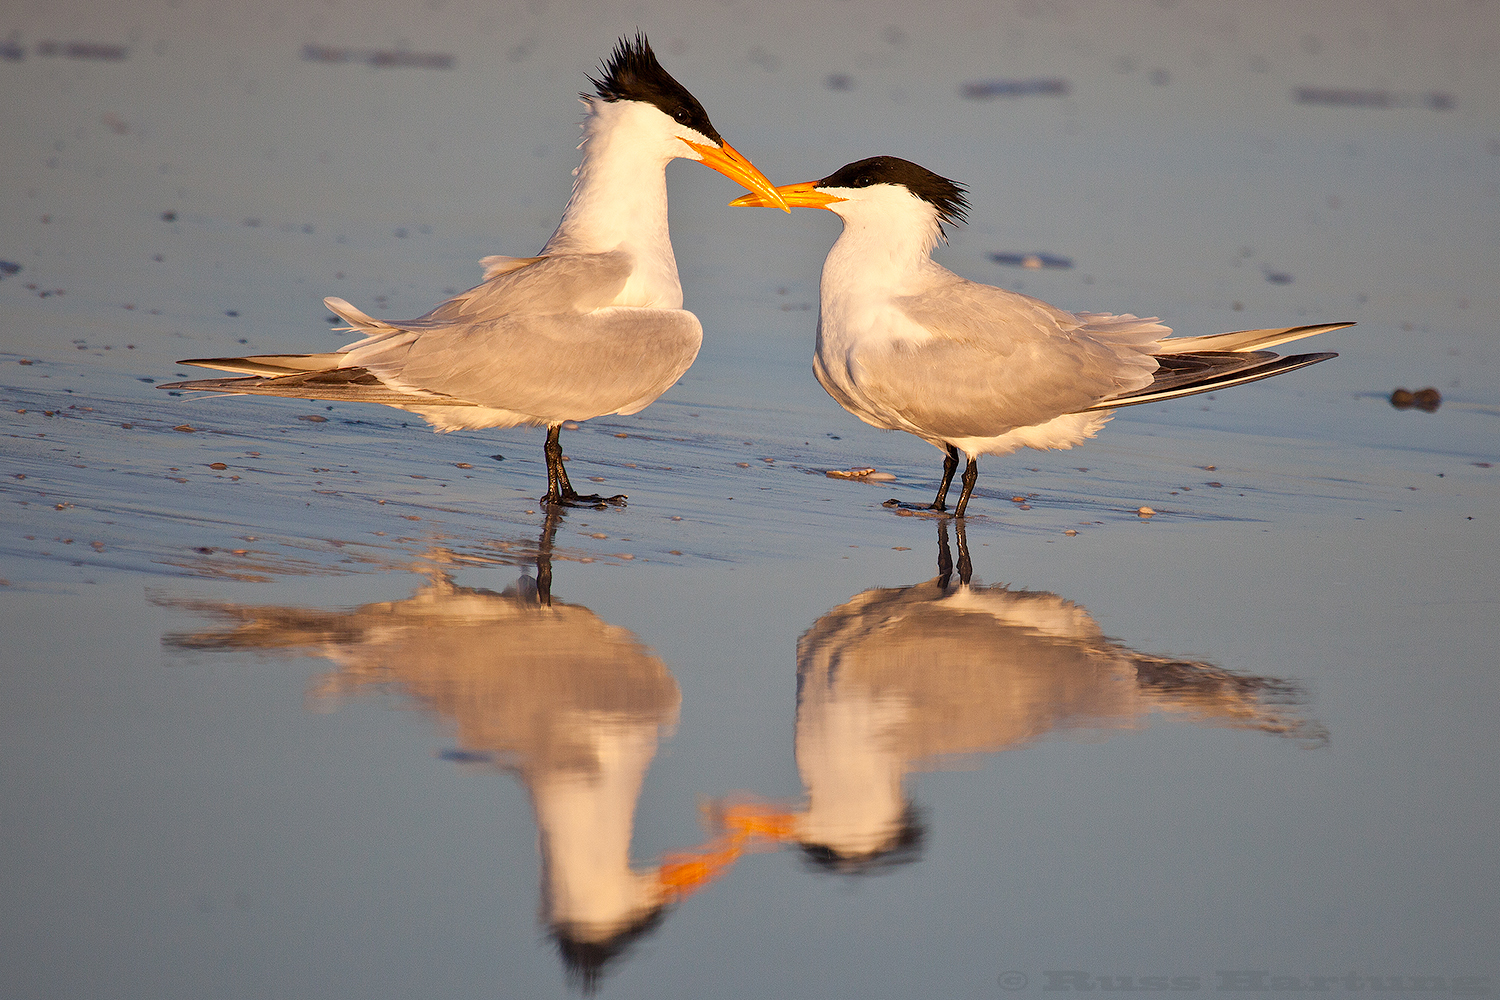 "Royal Tern Couple" - Juried Selection - Darkroom Gallery “Love” Photo Contest